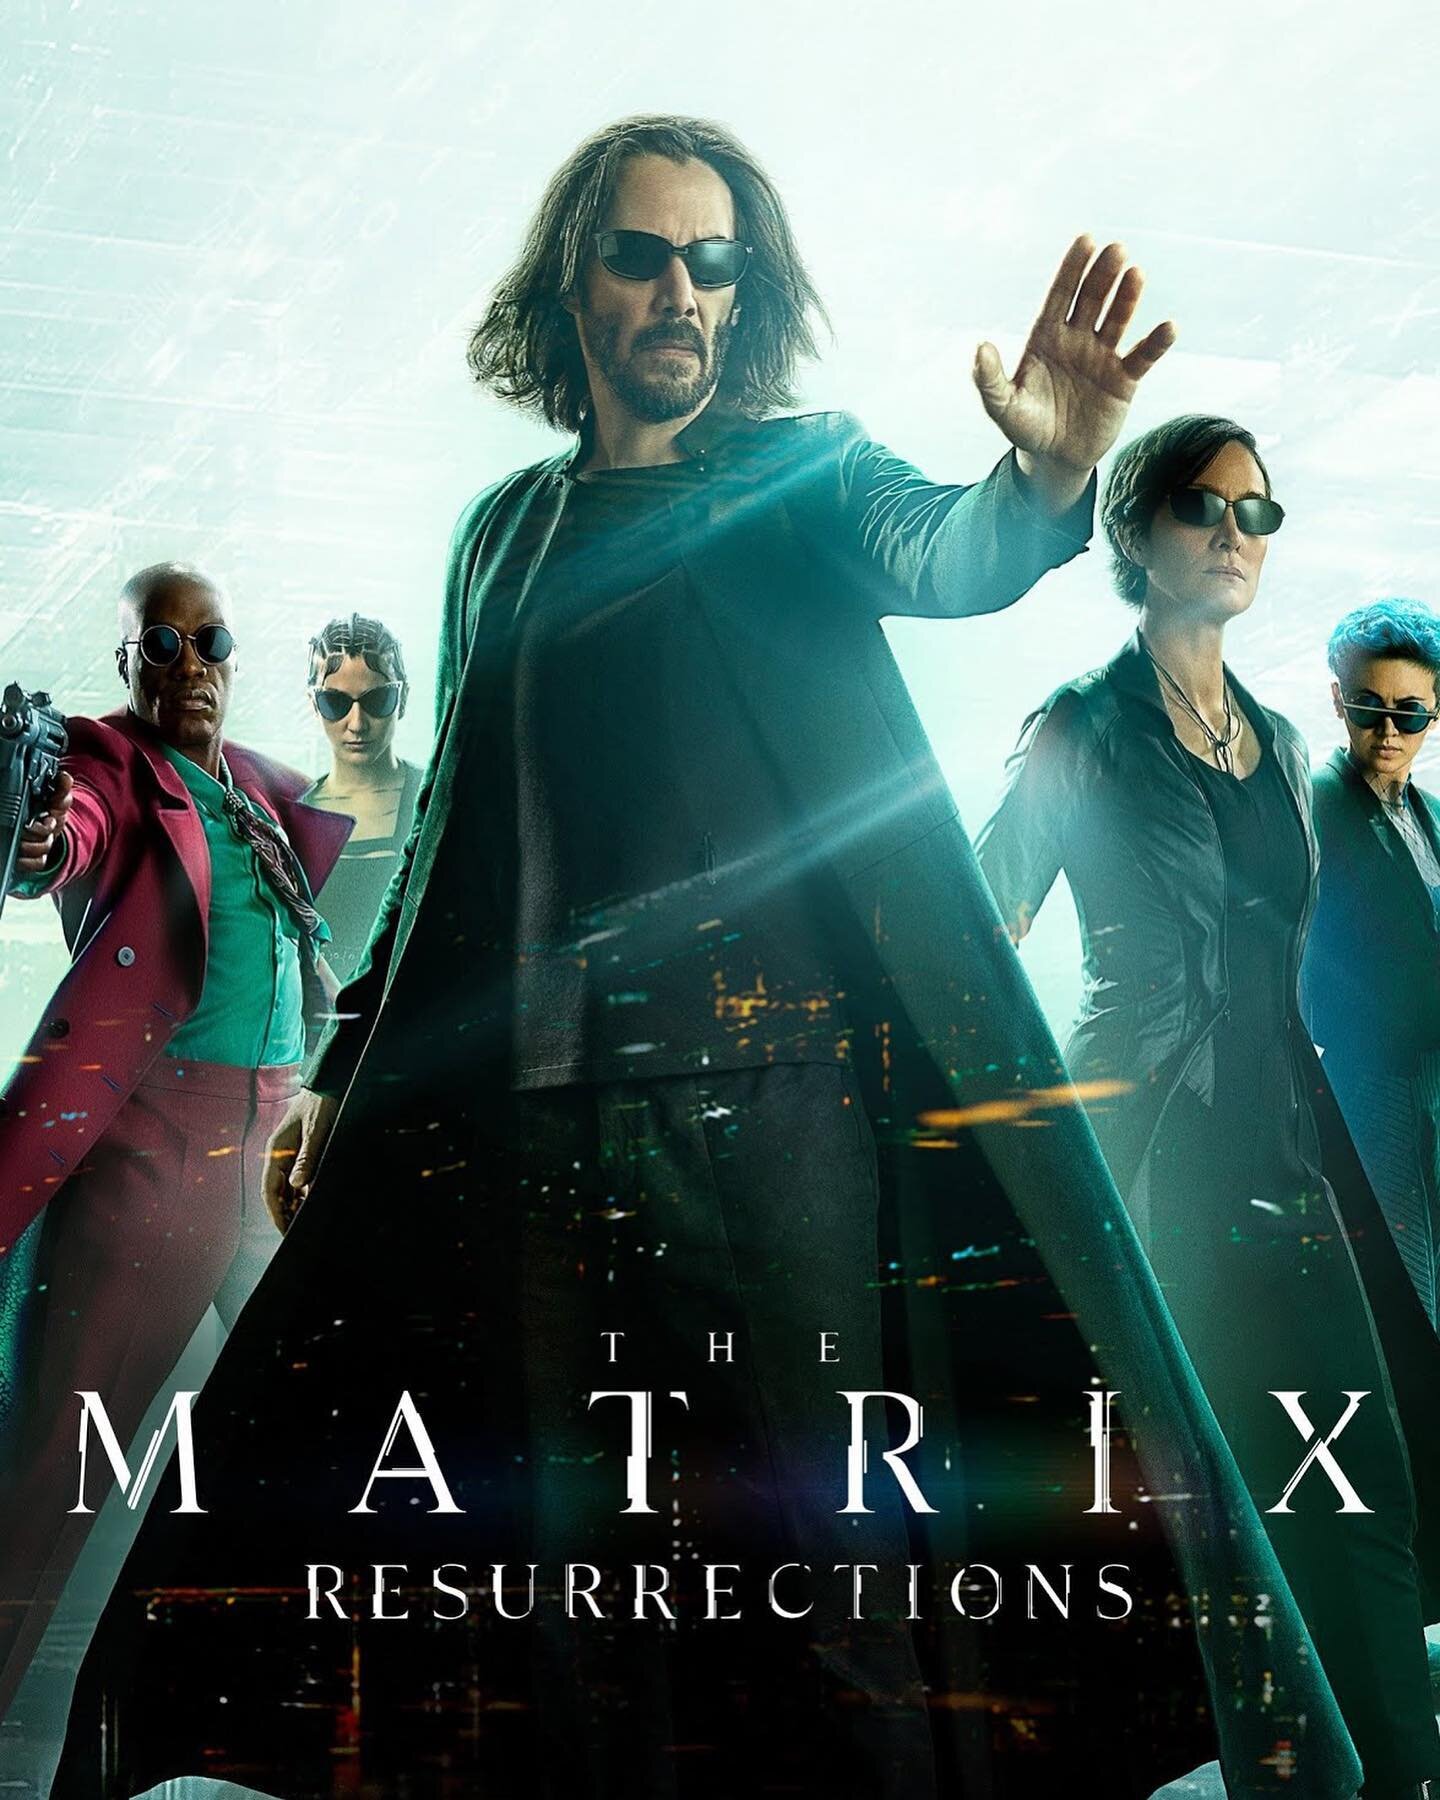 I just saw this&hellip;and I have some thoughts. This is a teaser for an actual new post on my site. Post will be up in a day or two. #thematrixresurrections #thematrix #cgmcginndotcom #whoa